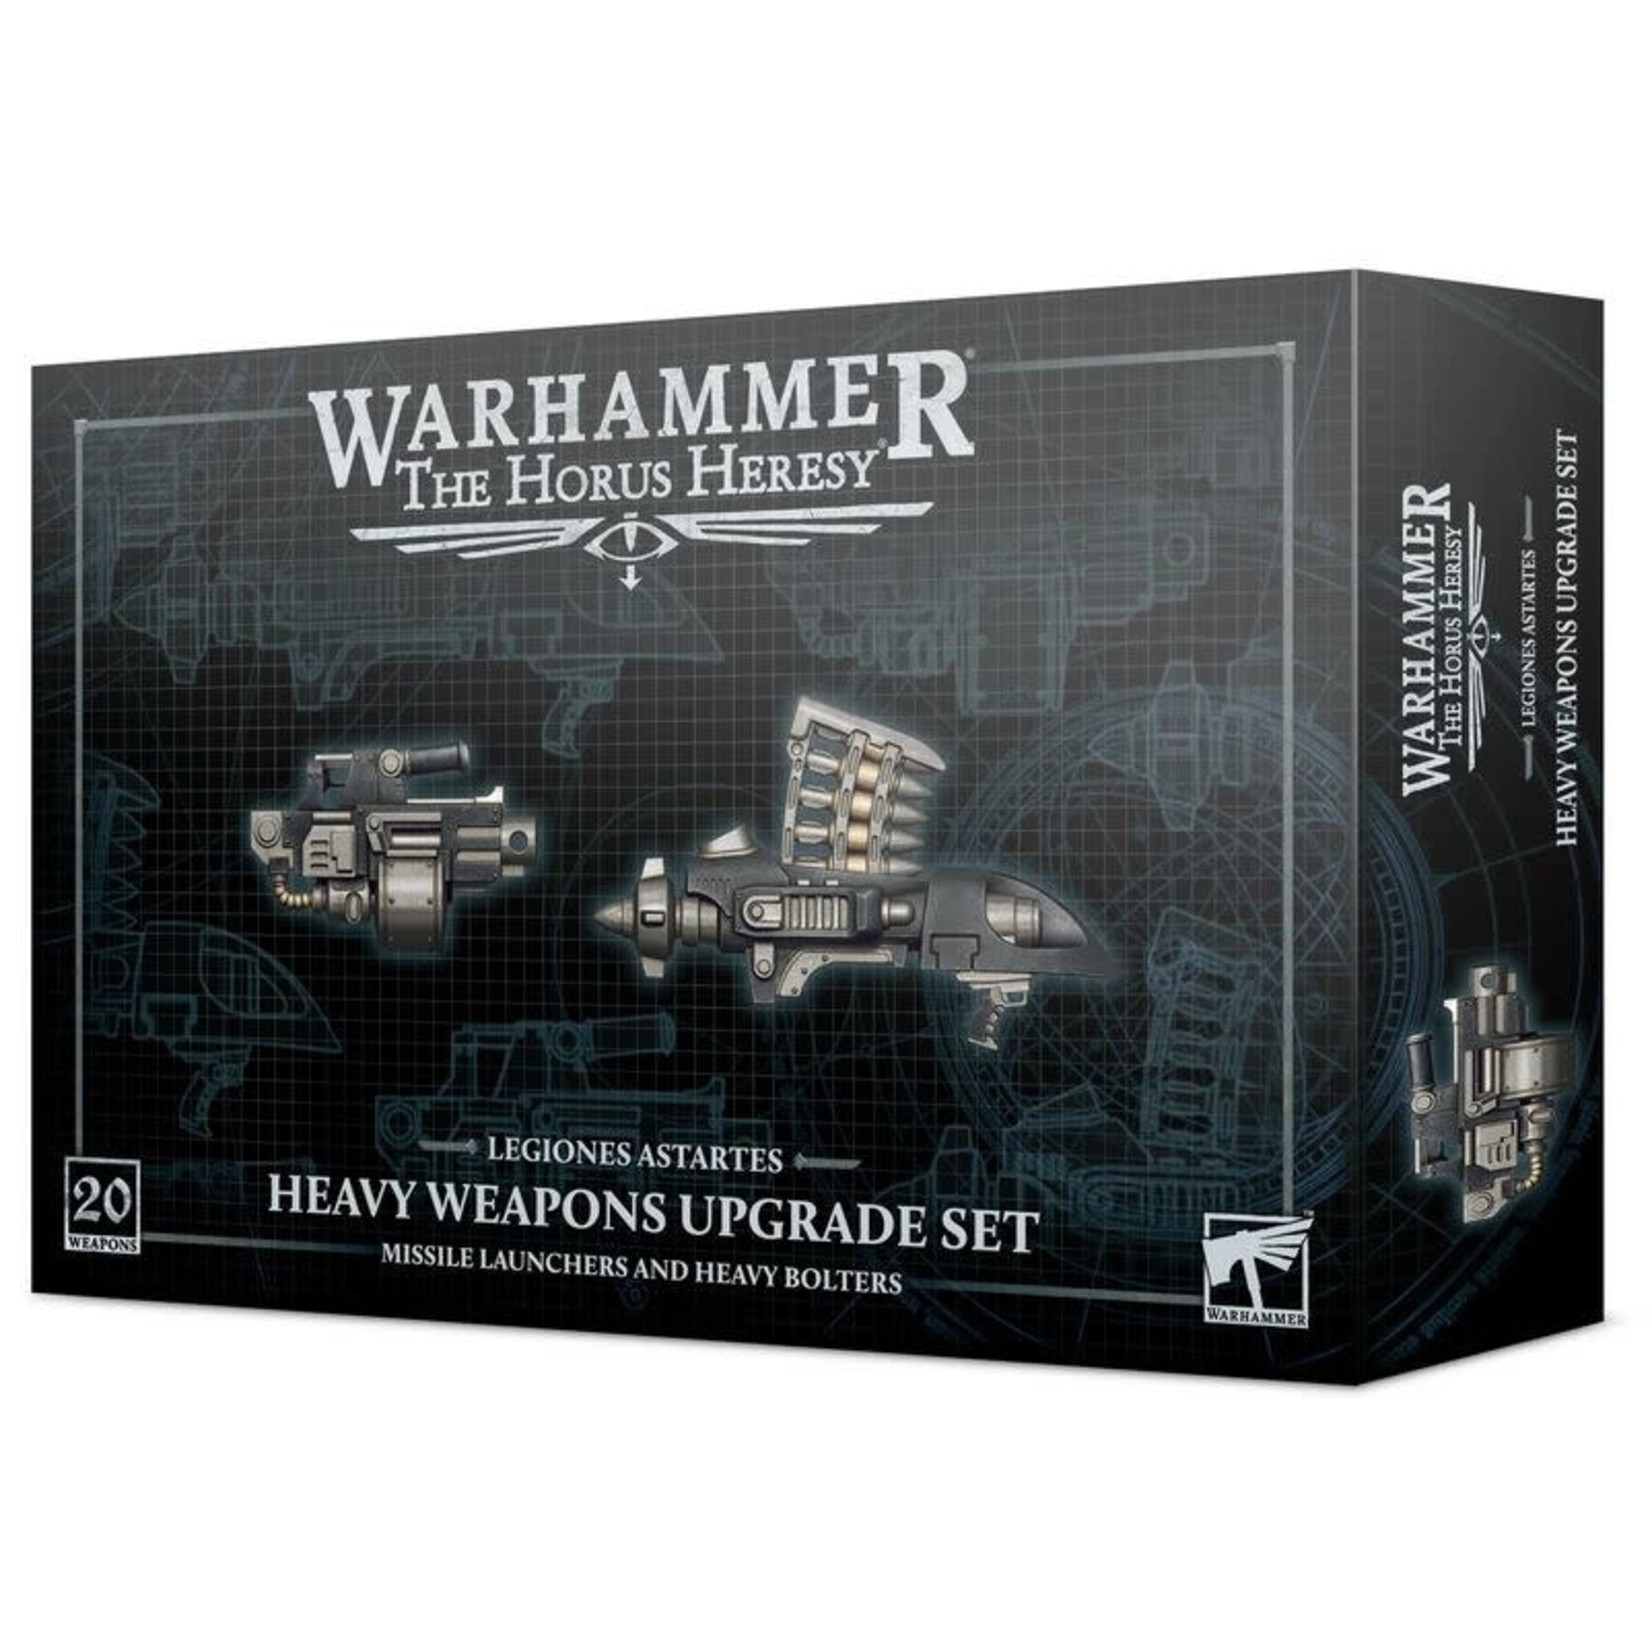 The Horus Heresy: Heavy Weapons Upgrade Set – Missile Launchers and Heavy Bolters